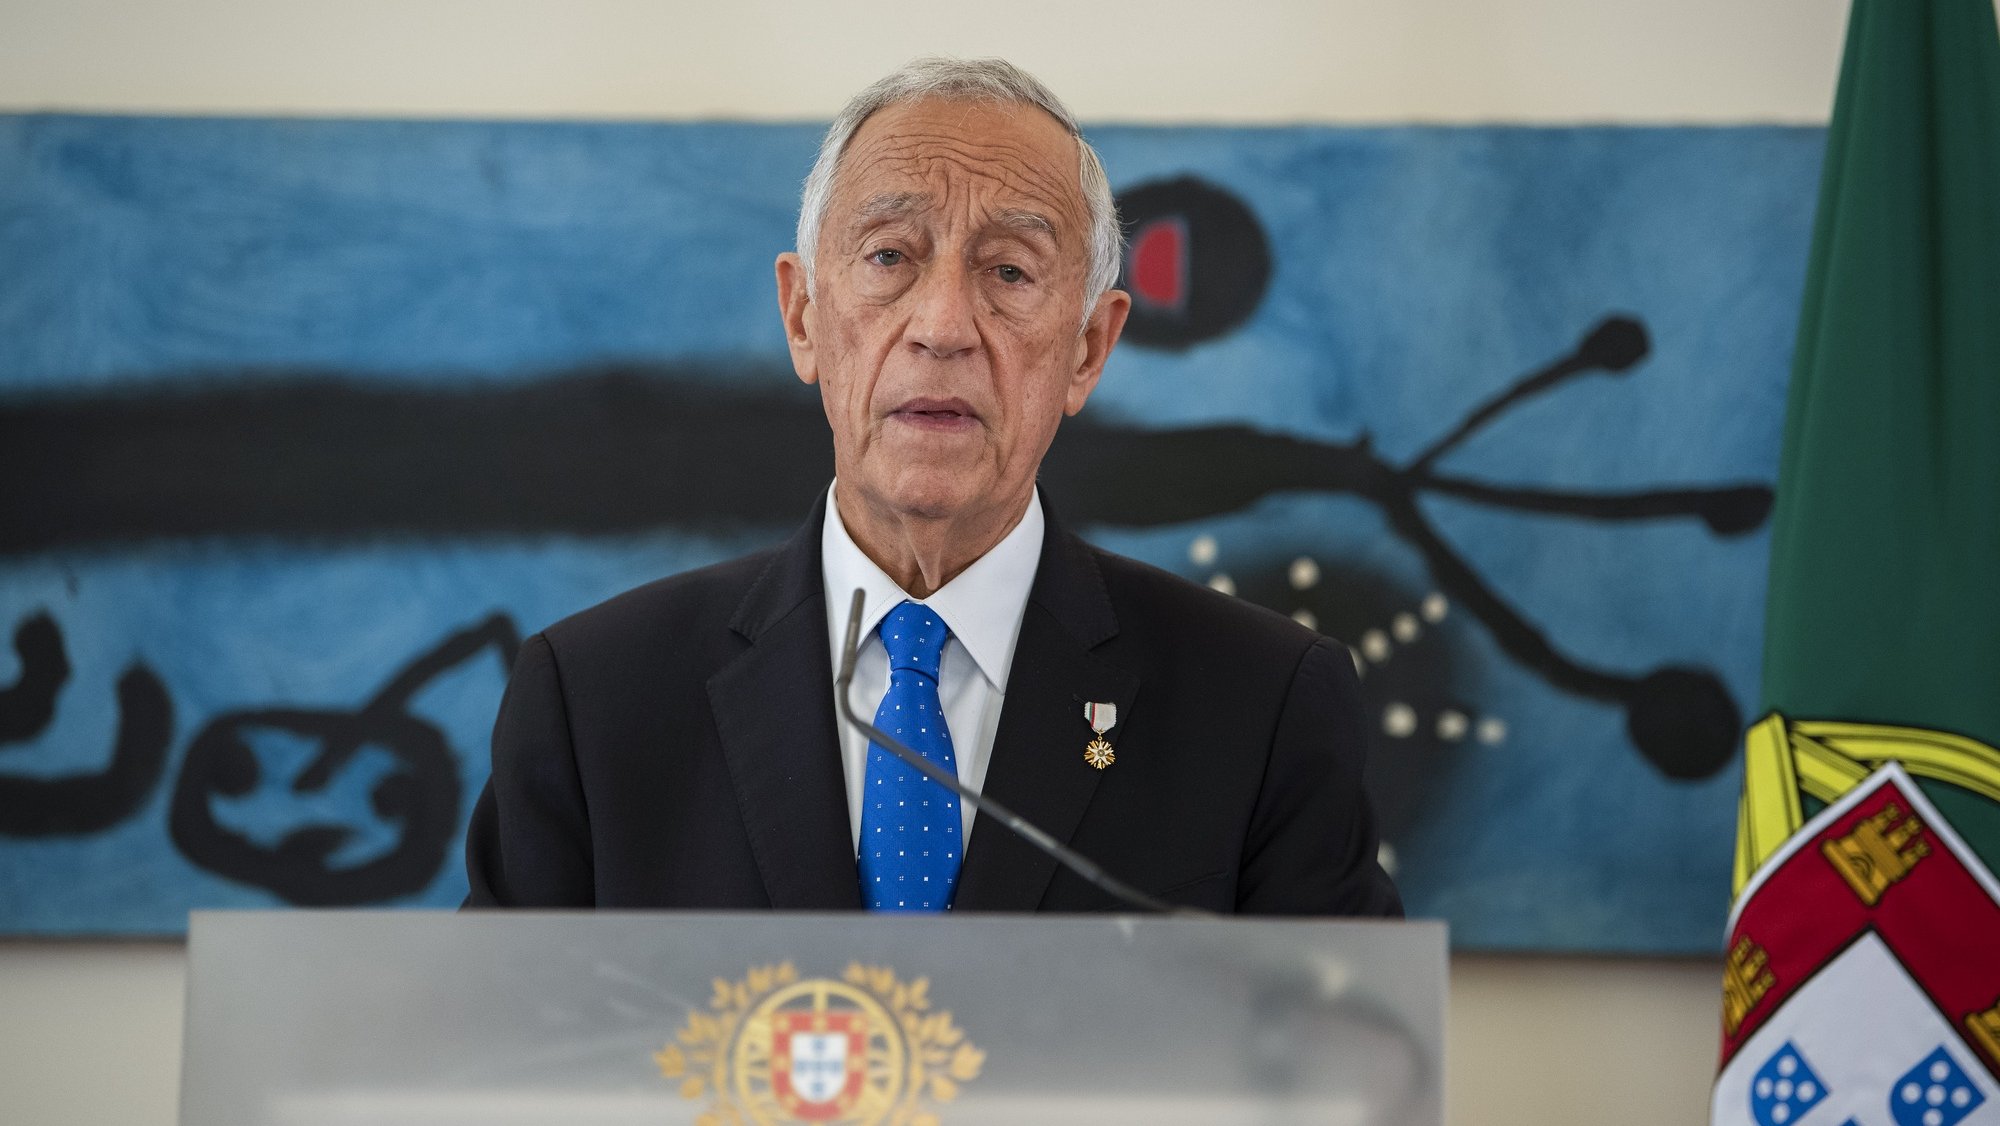 Portugal&#039;s President Marcelo Rebelo de Sousa (R) accompanied by Bulgaria&#039;s President Rumen Radev (not in the picture) during a press conference following the visit to Serralves Museum, Porto, Portugal, 12 April 2022. The President of the Republic of Bulgaria will pay an official visit to Portugal on Tuesday and Wednesday, starting in Porto. RUI MANUEL FARINHA/LUSA